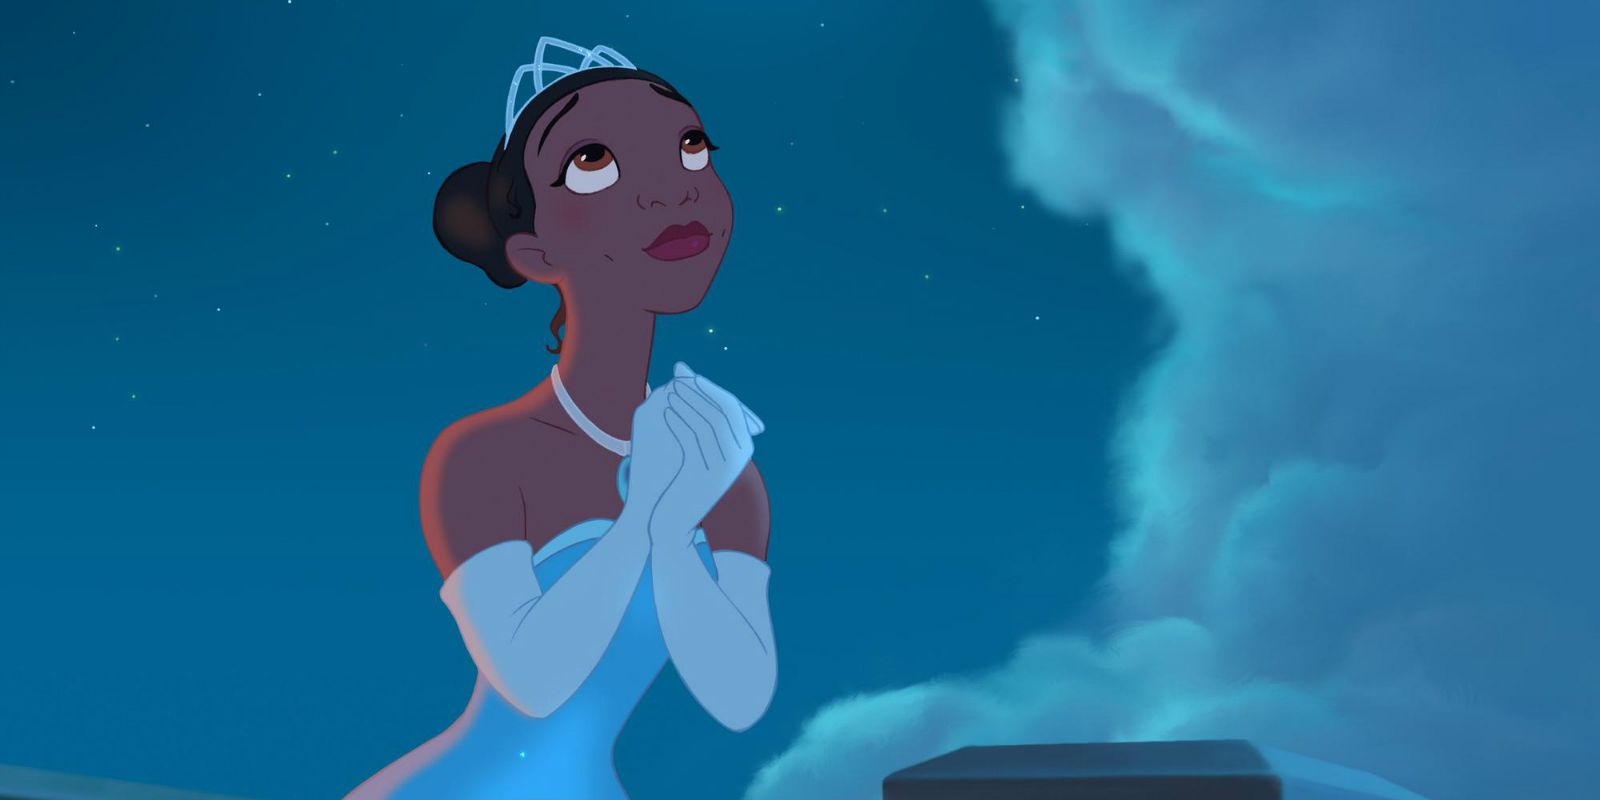 Tiana in The Princess and the Frog